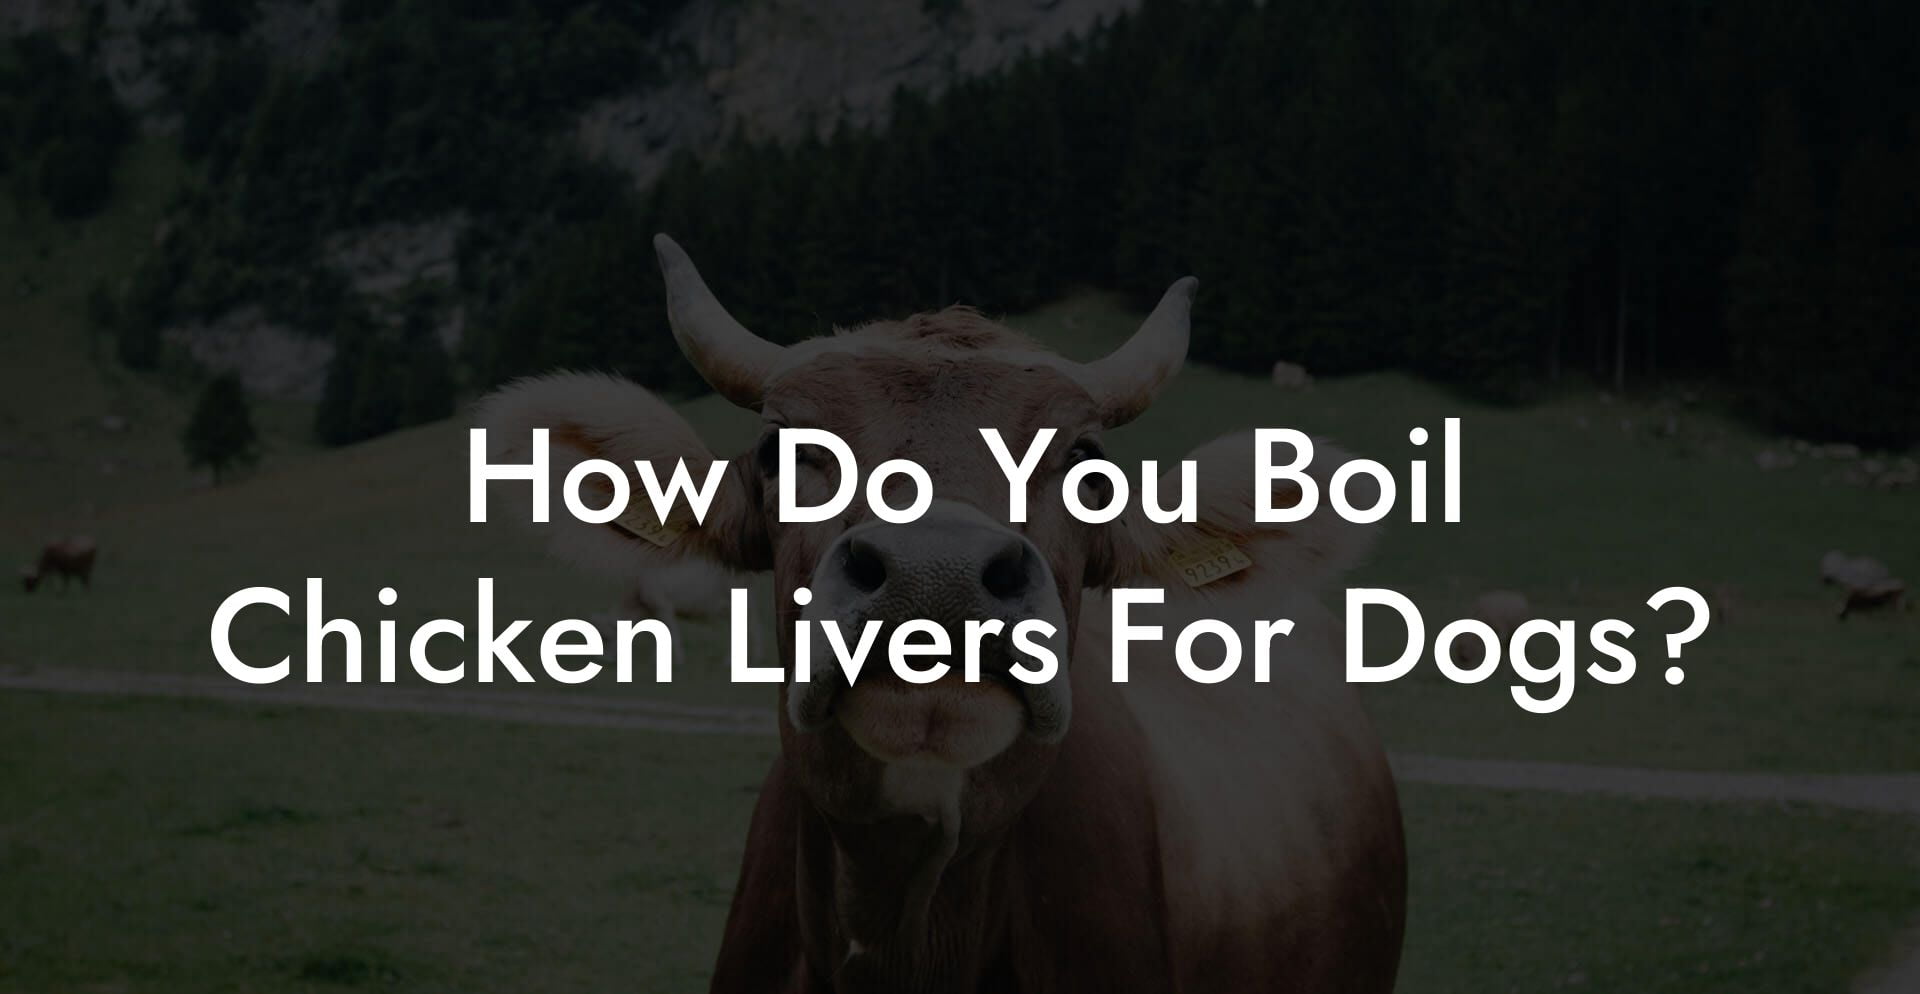 How Do You Boil Chicken Livers For Dogs?